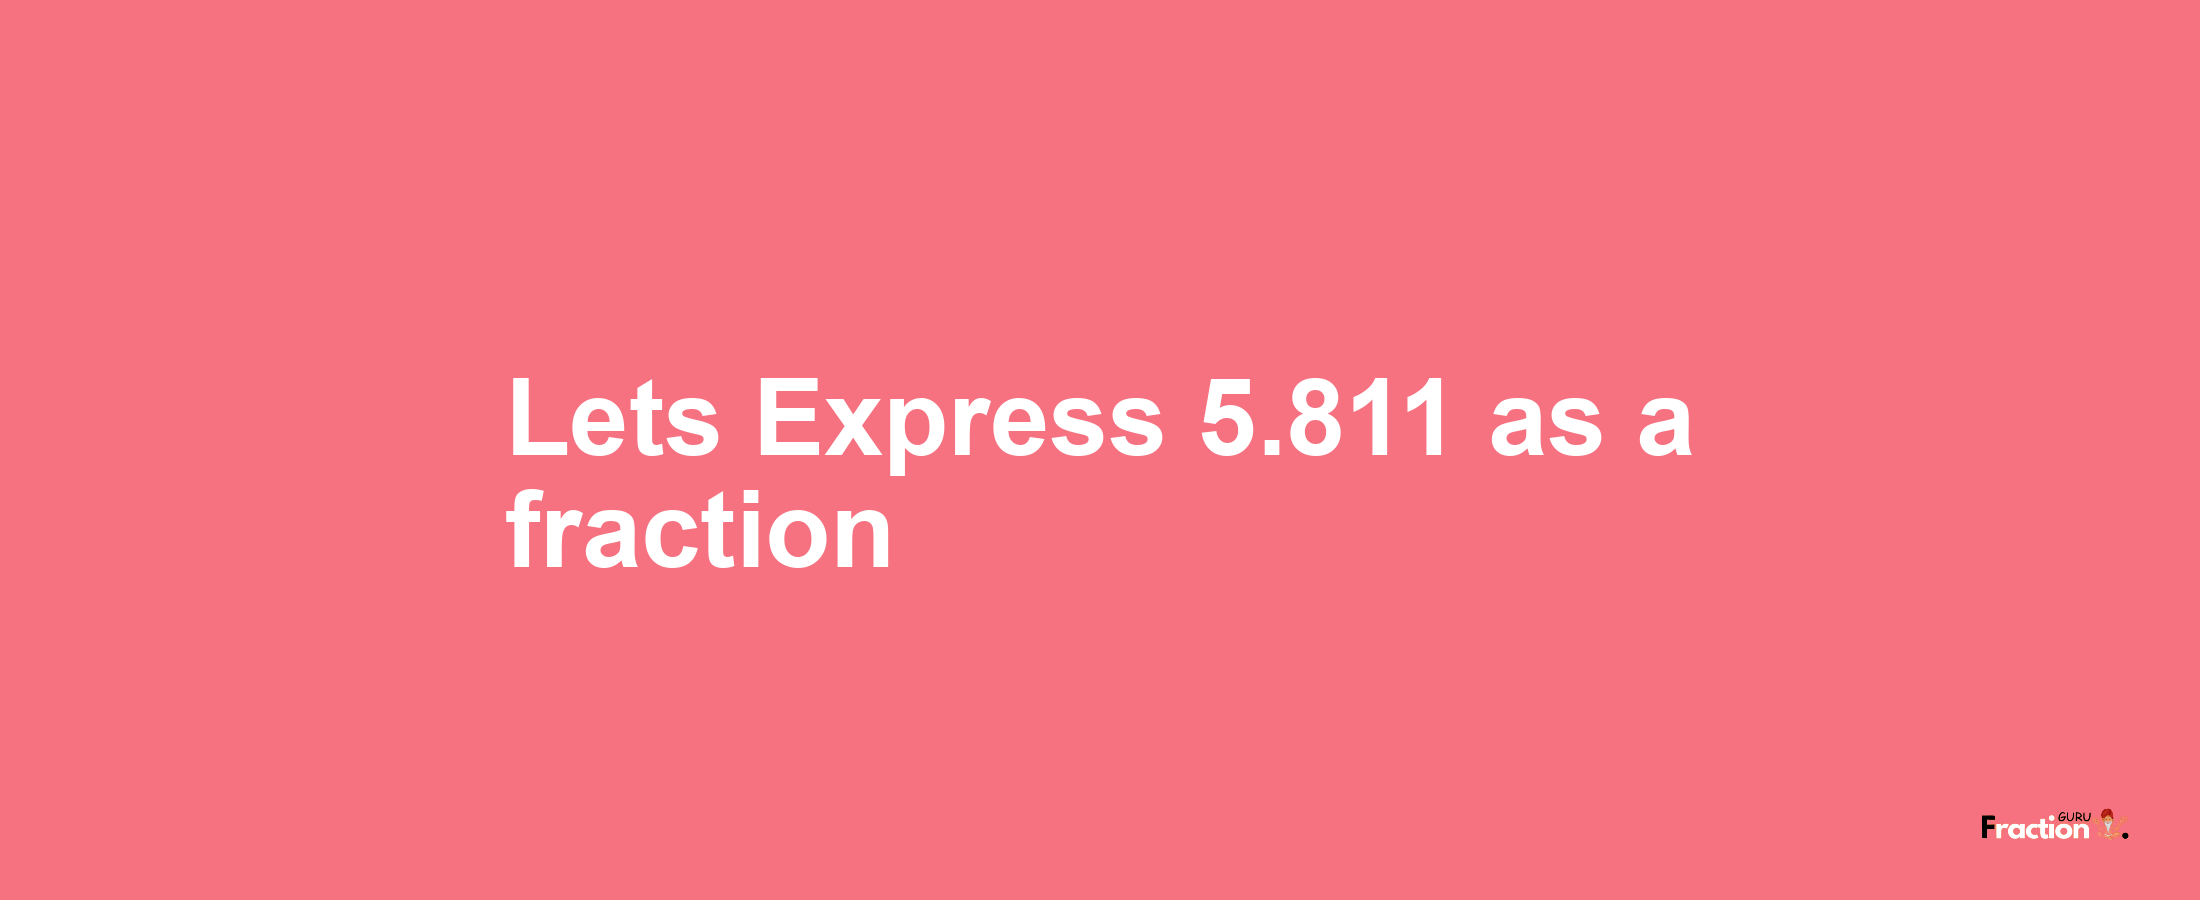 Lets Express 5.811 as afraction